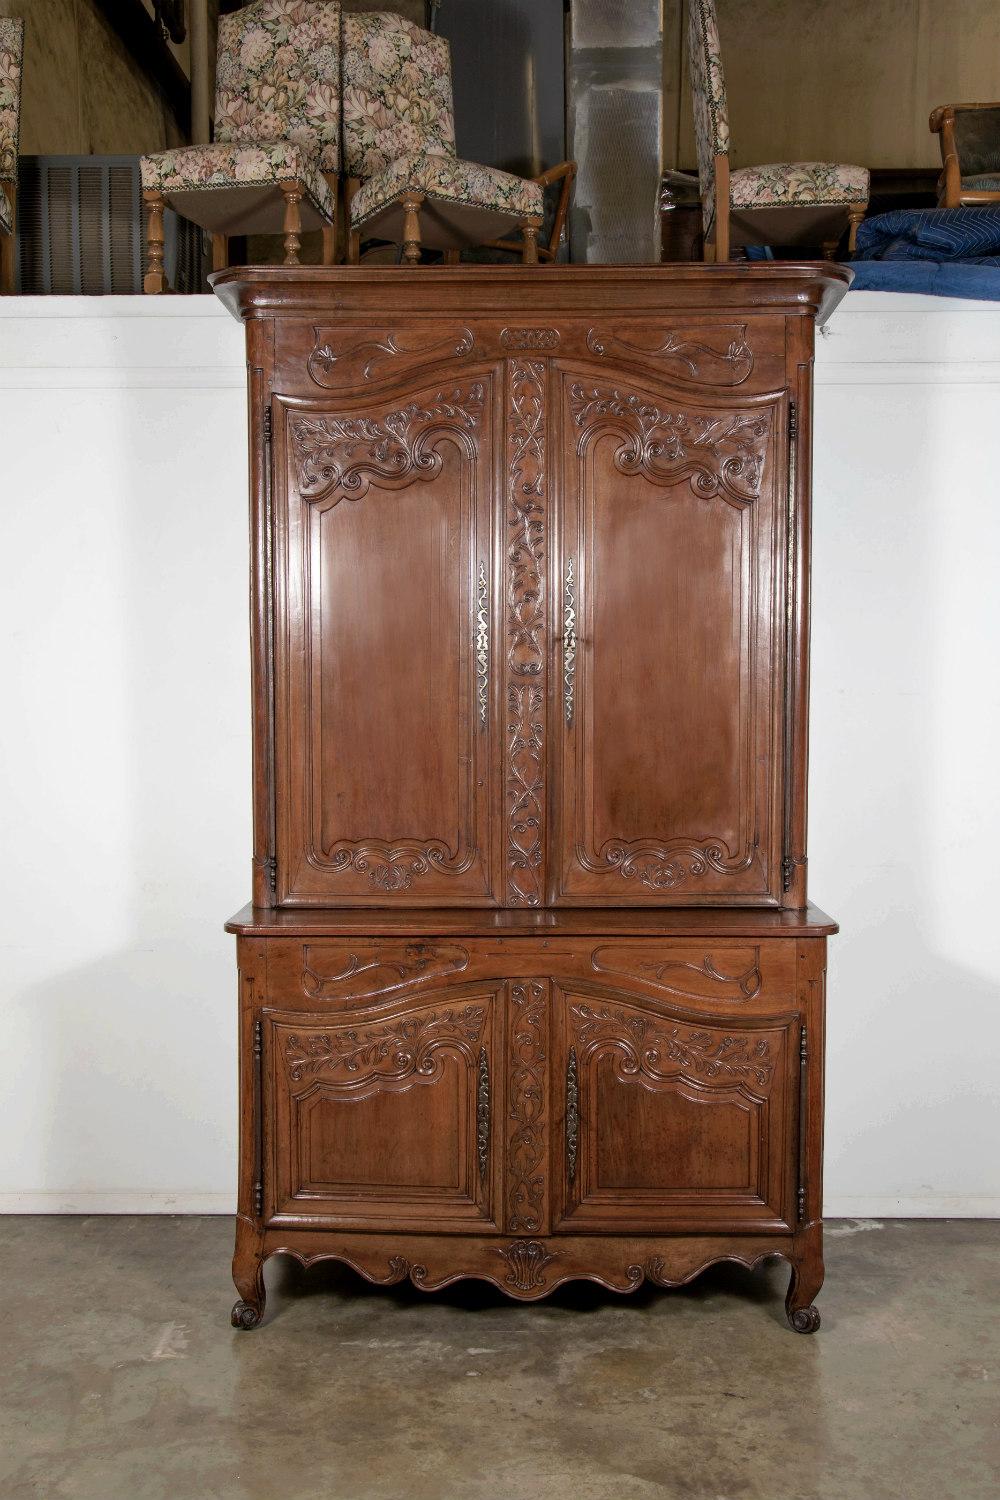 Monumental 18th century country French Louis XV buffet deux corps handcrafted by talented artisans in the Loire Valley. Expertly crafted and sculpted in select French walnut, this period chateau piece features an upper cabinet having a carved frieze